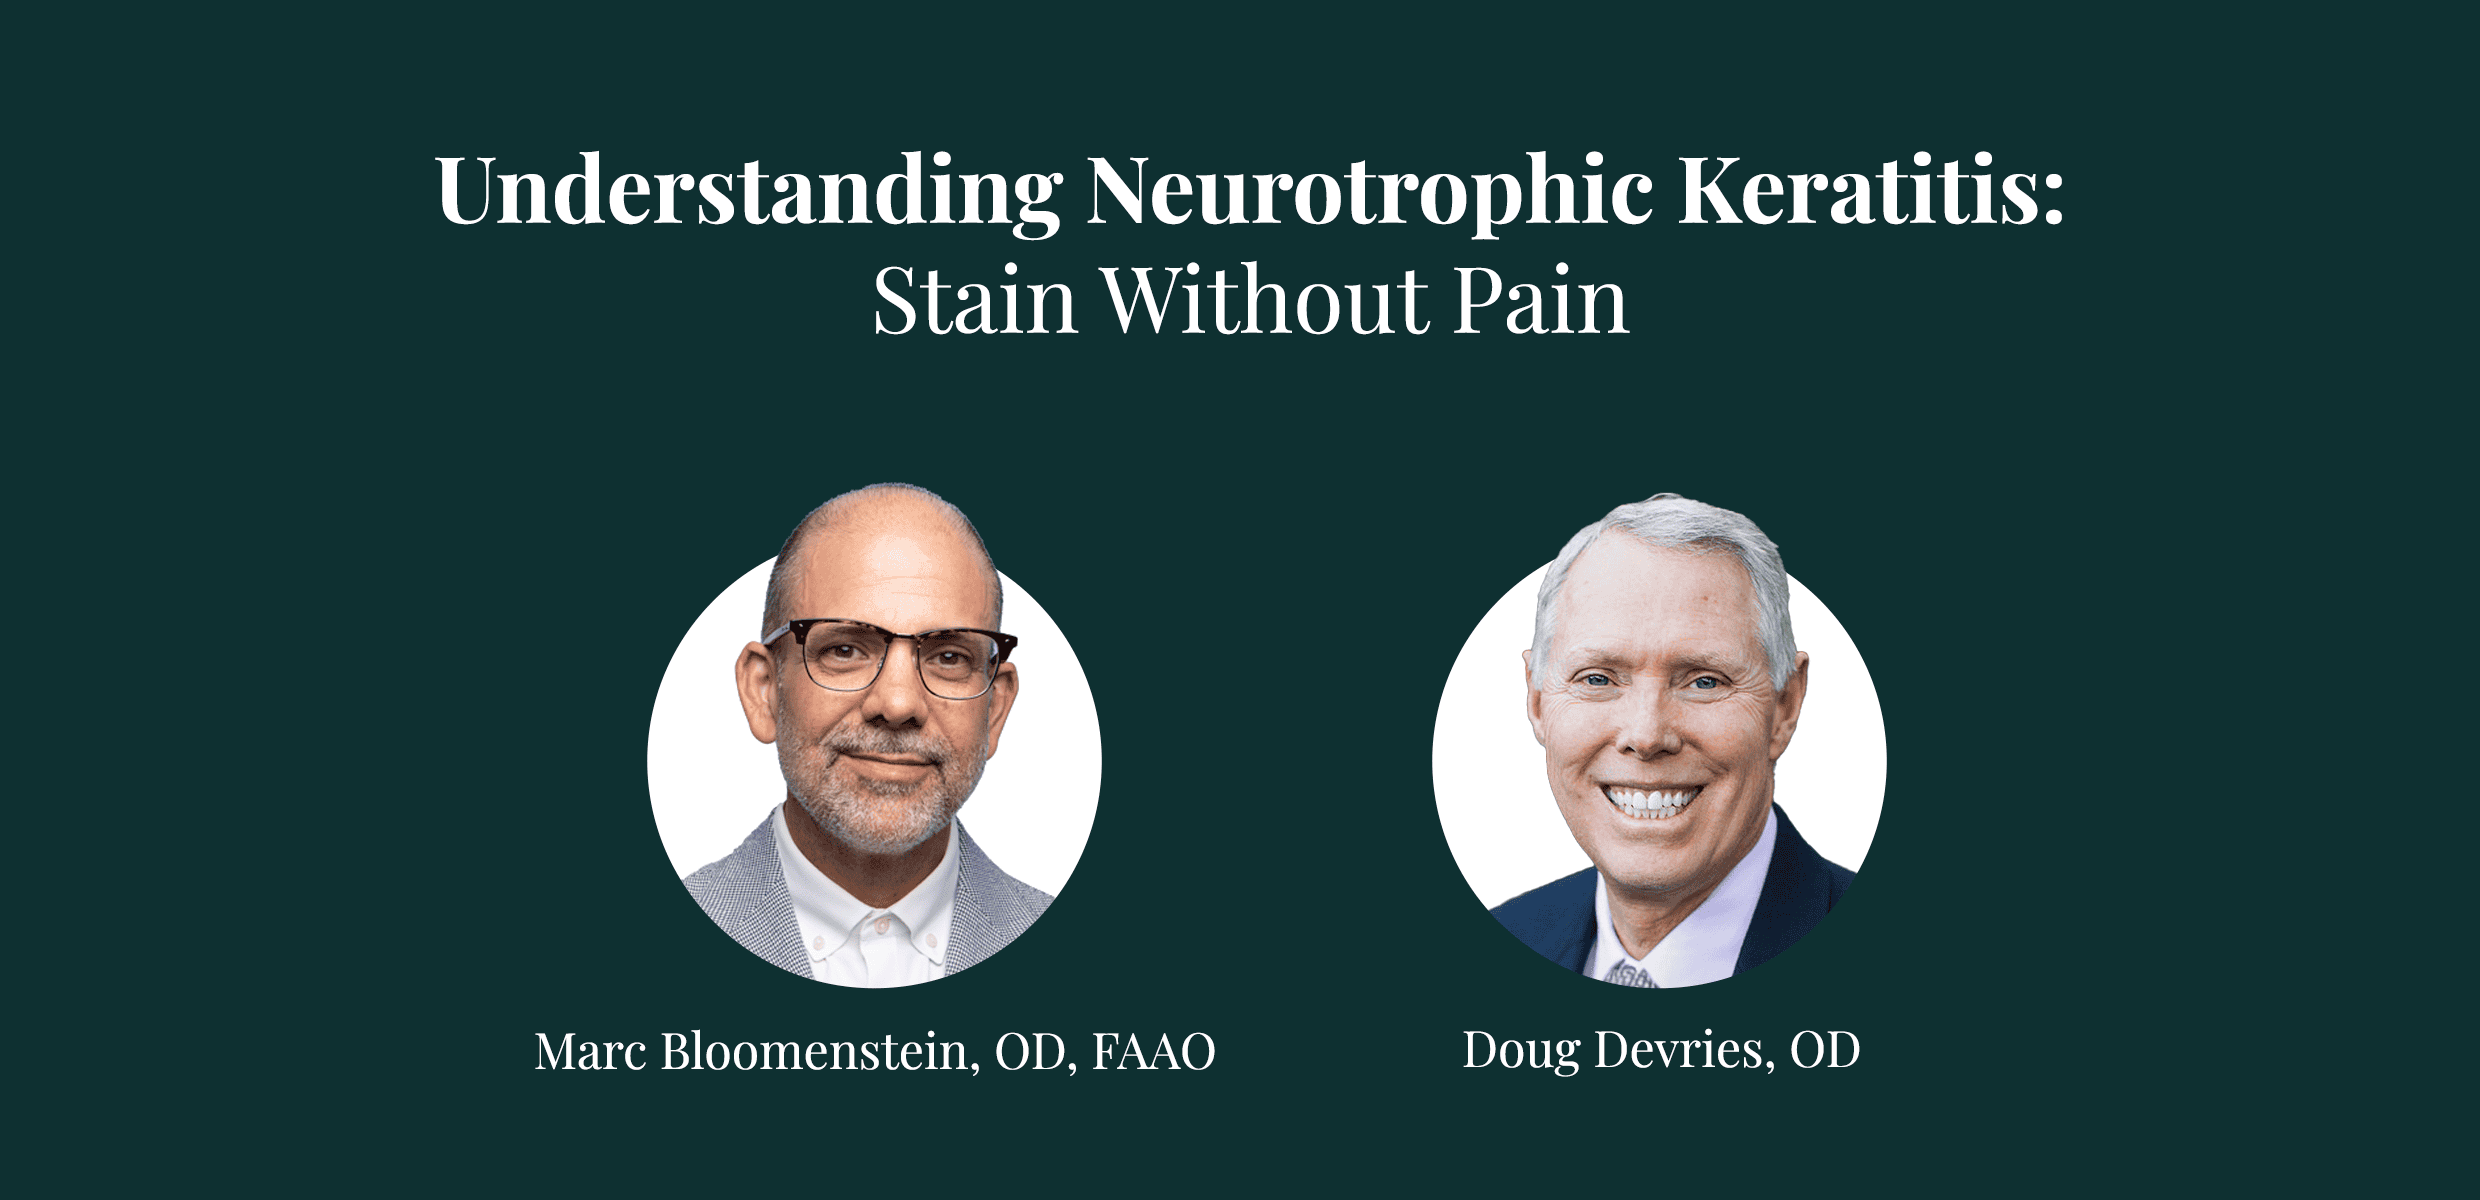 Understanding Neurotrophic Keratitis: Stain Without Pain